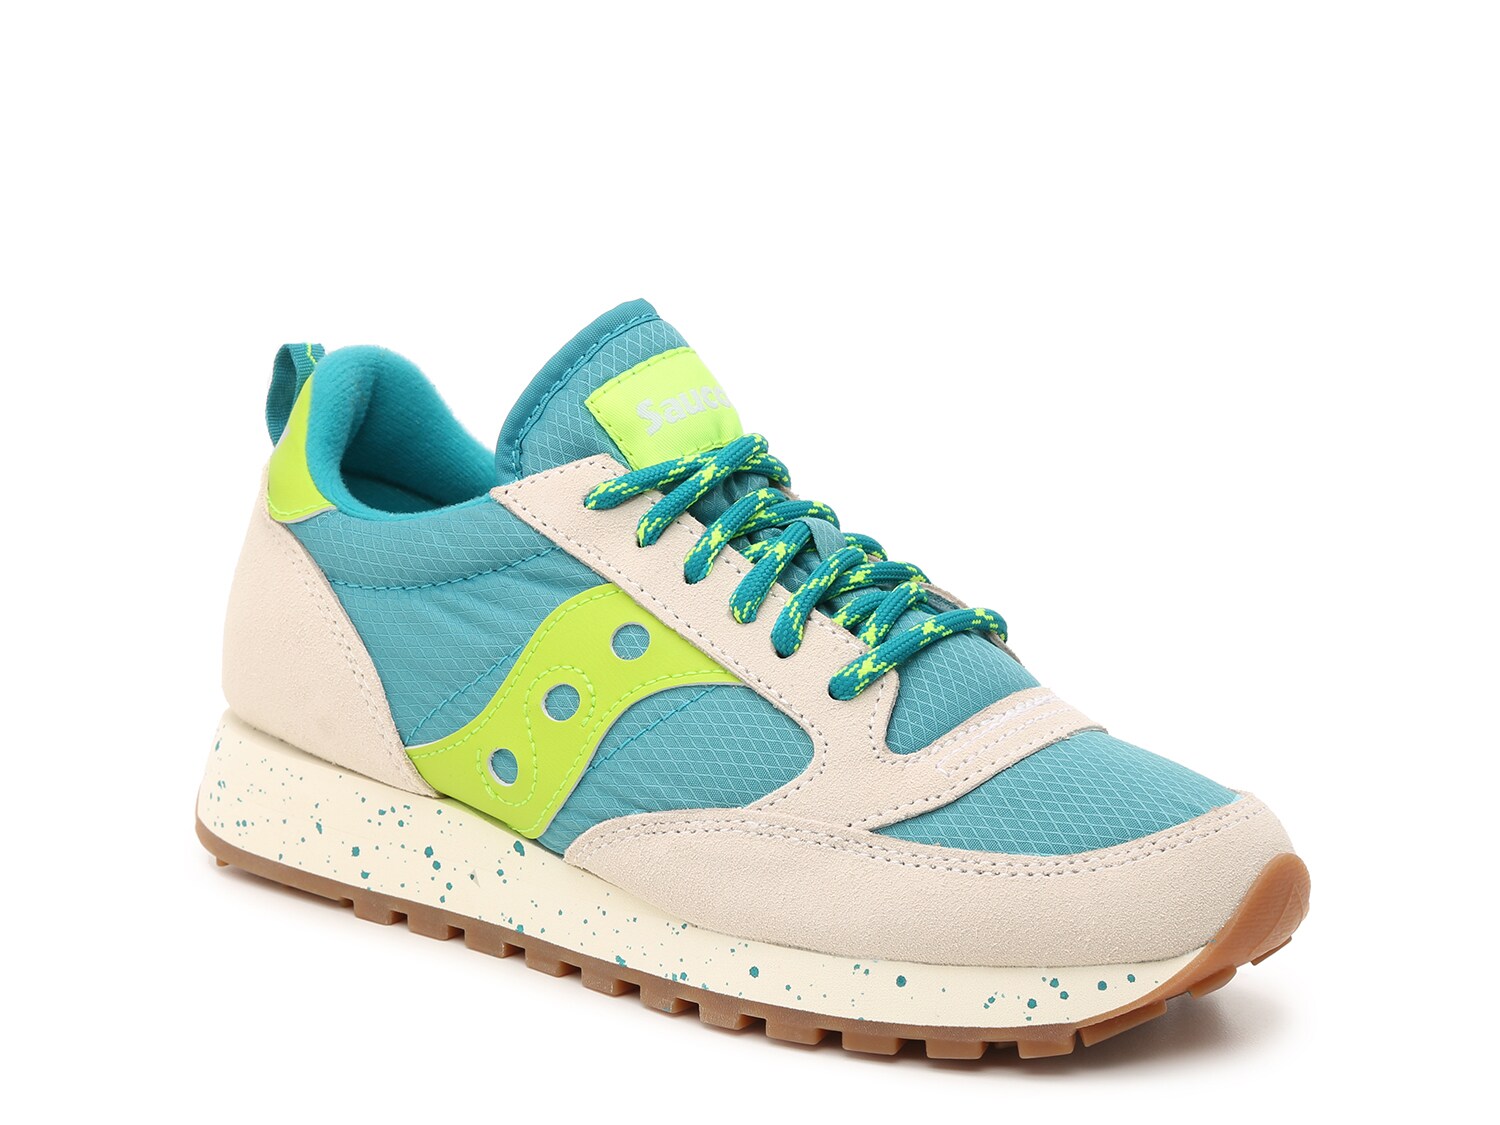 saucony sneakers at dsw